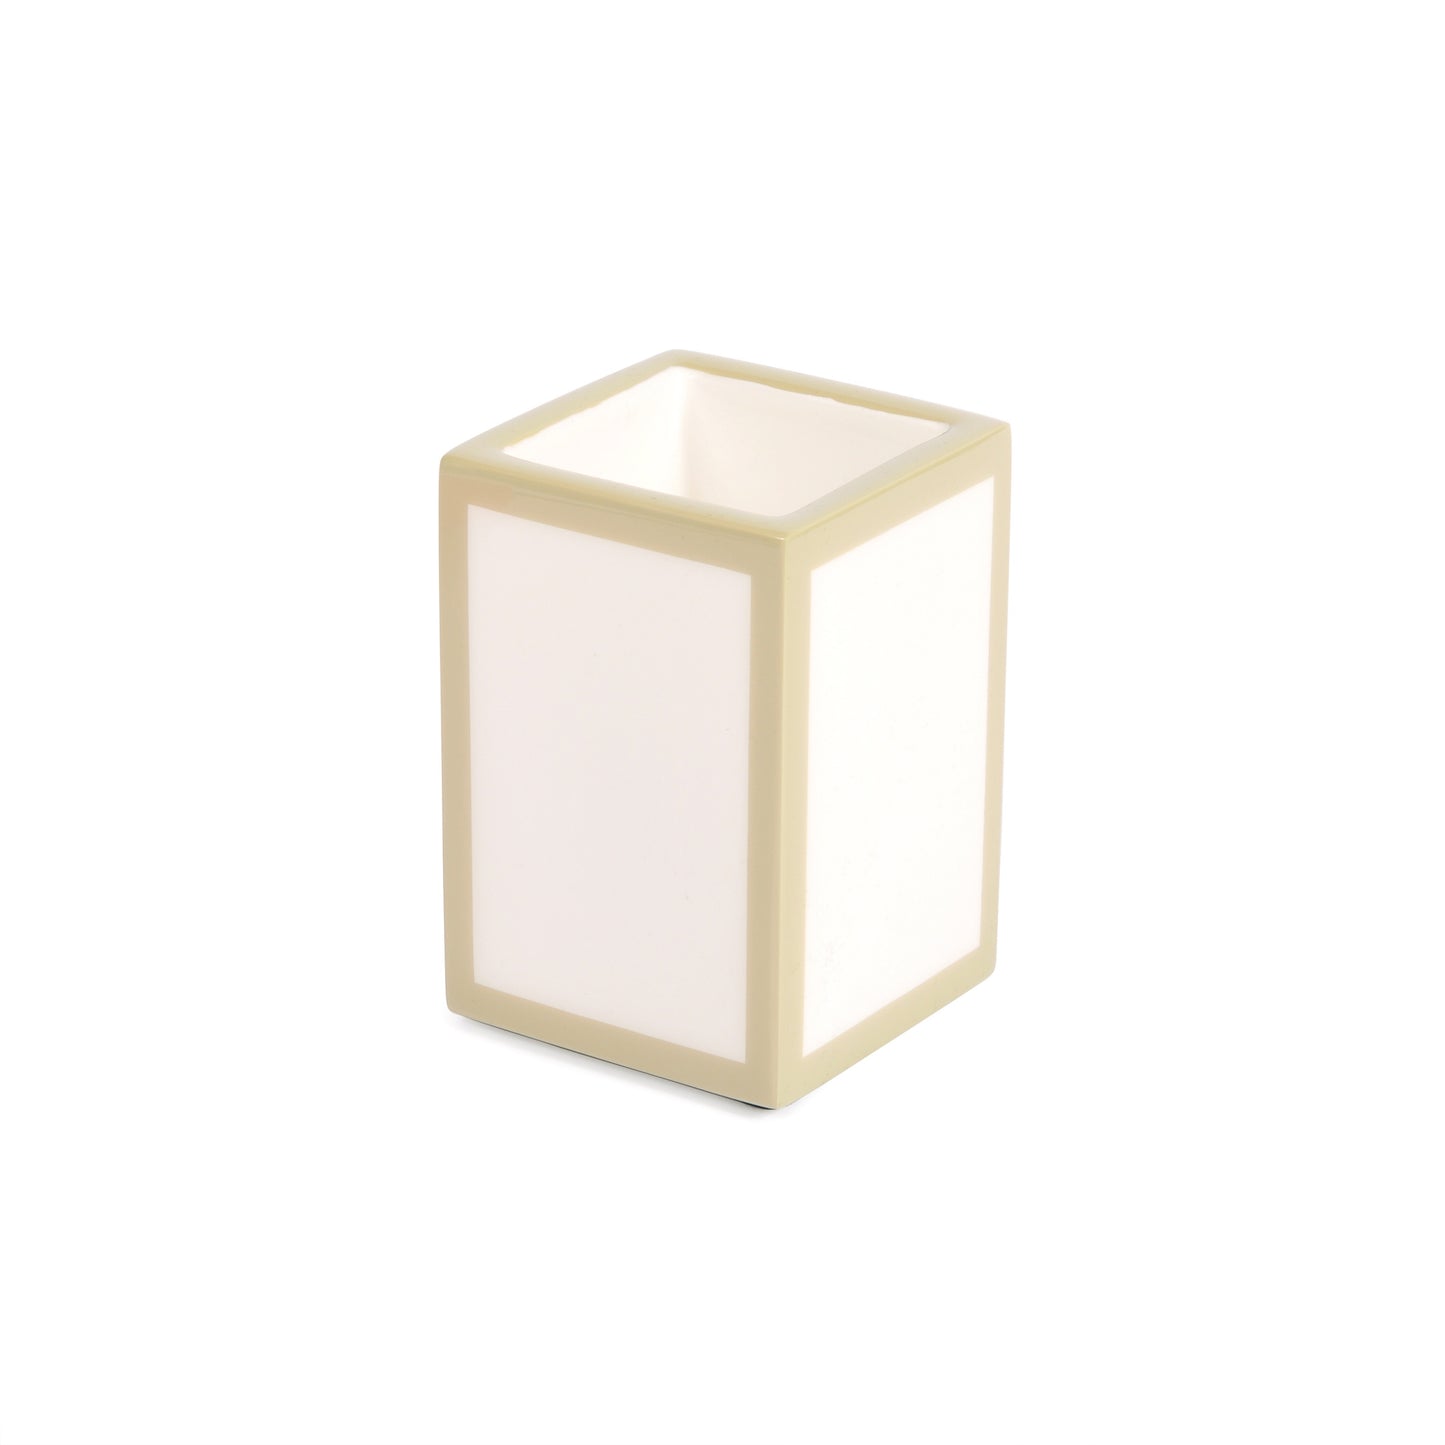 Lacquer Pot White and Taupe Joanna Wood Shop